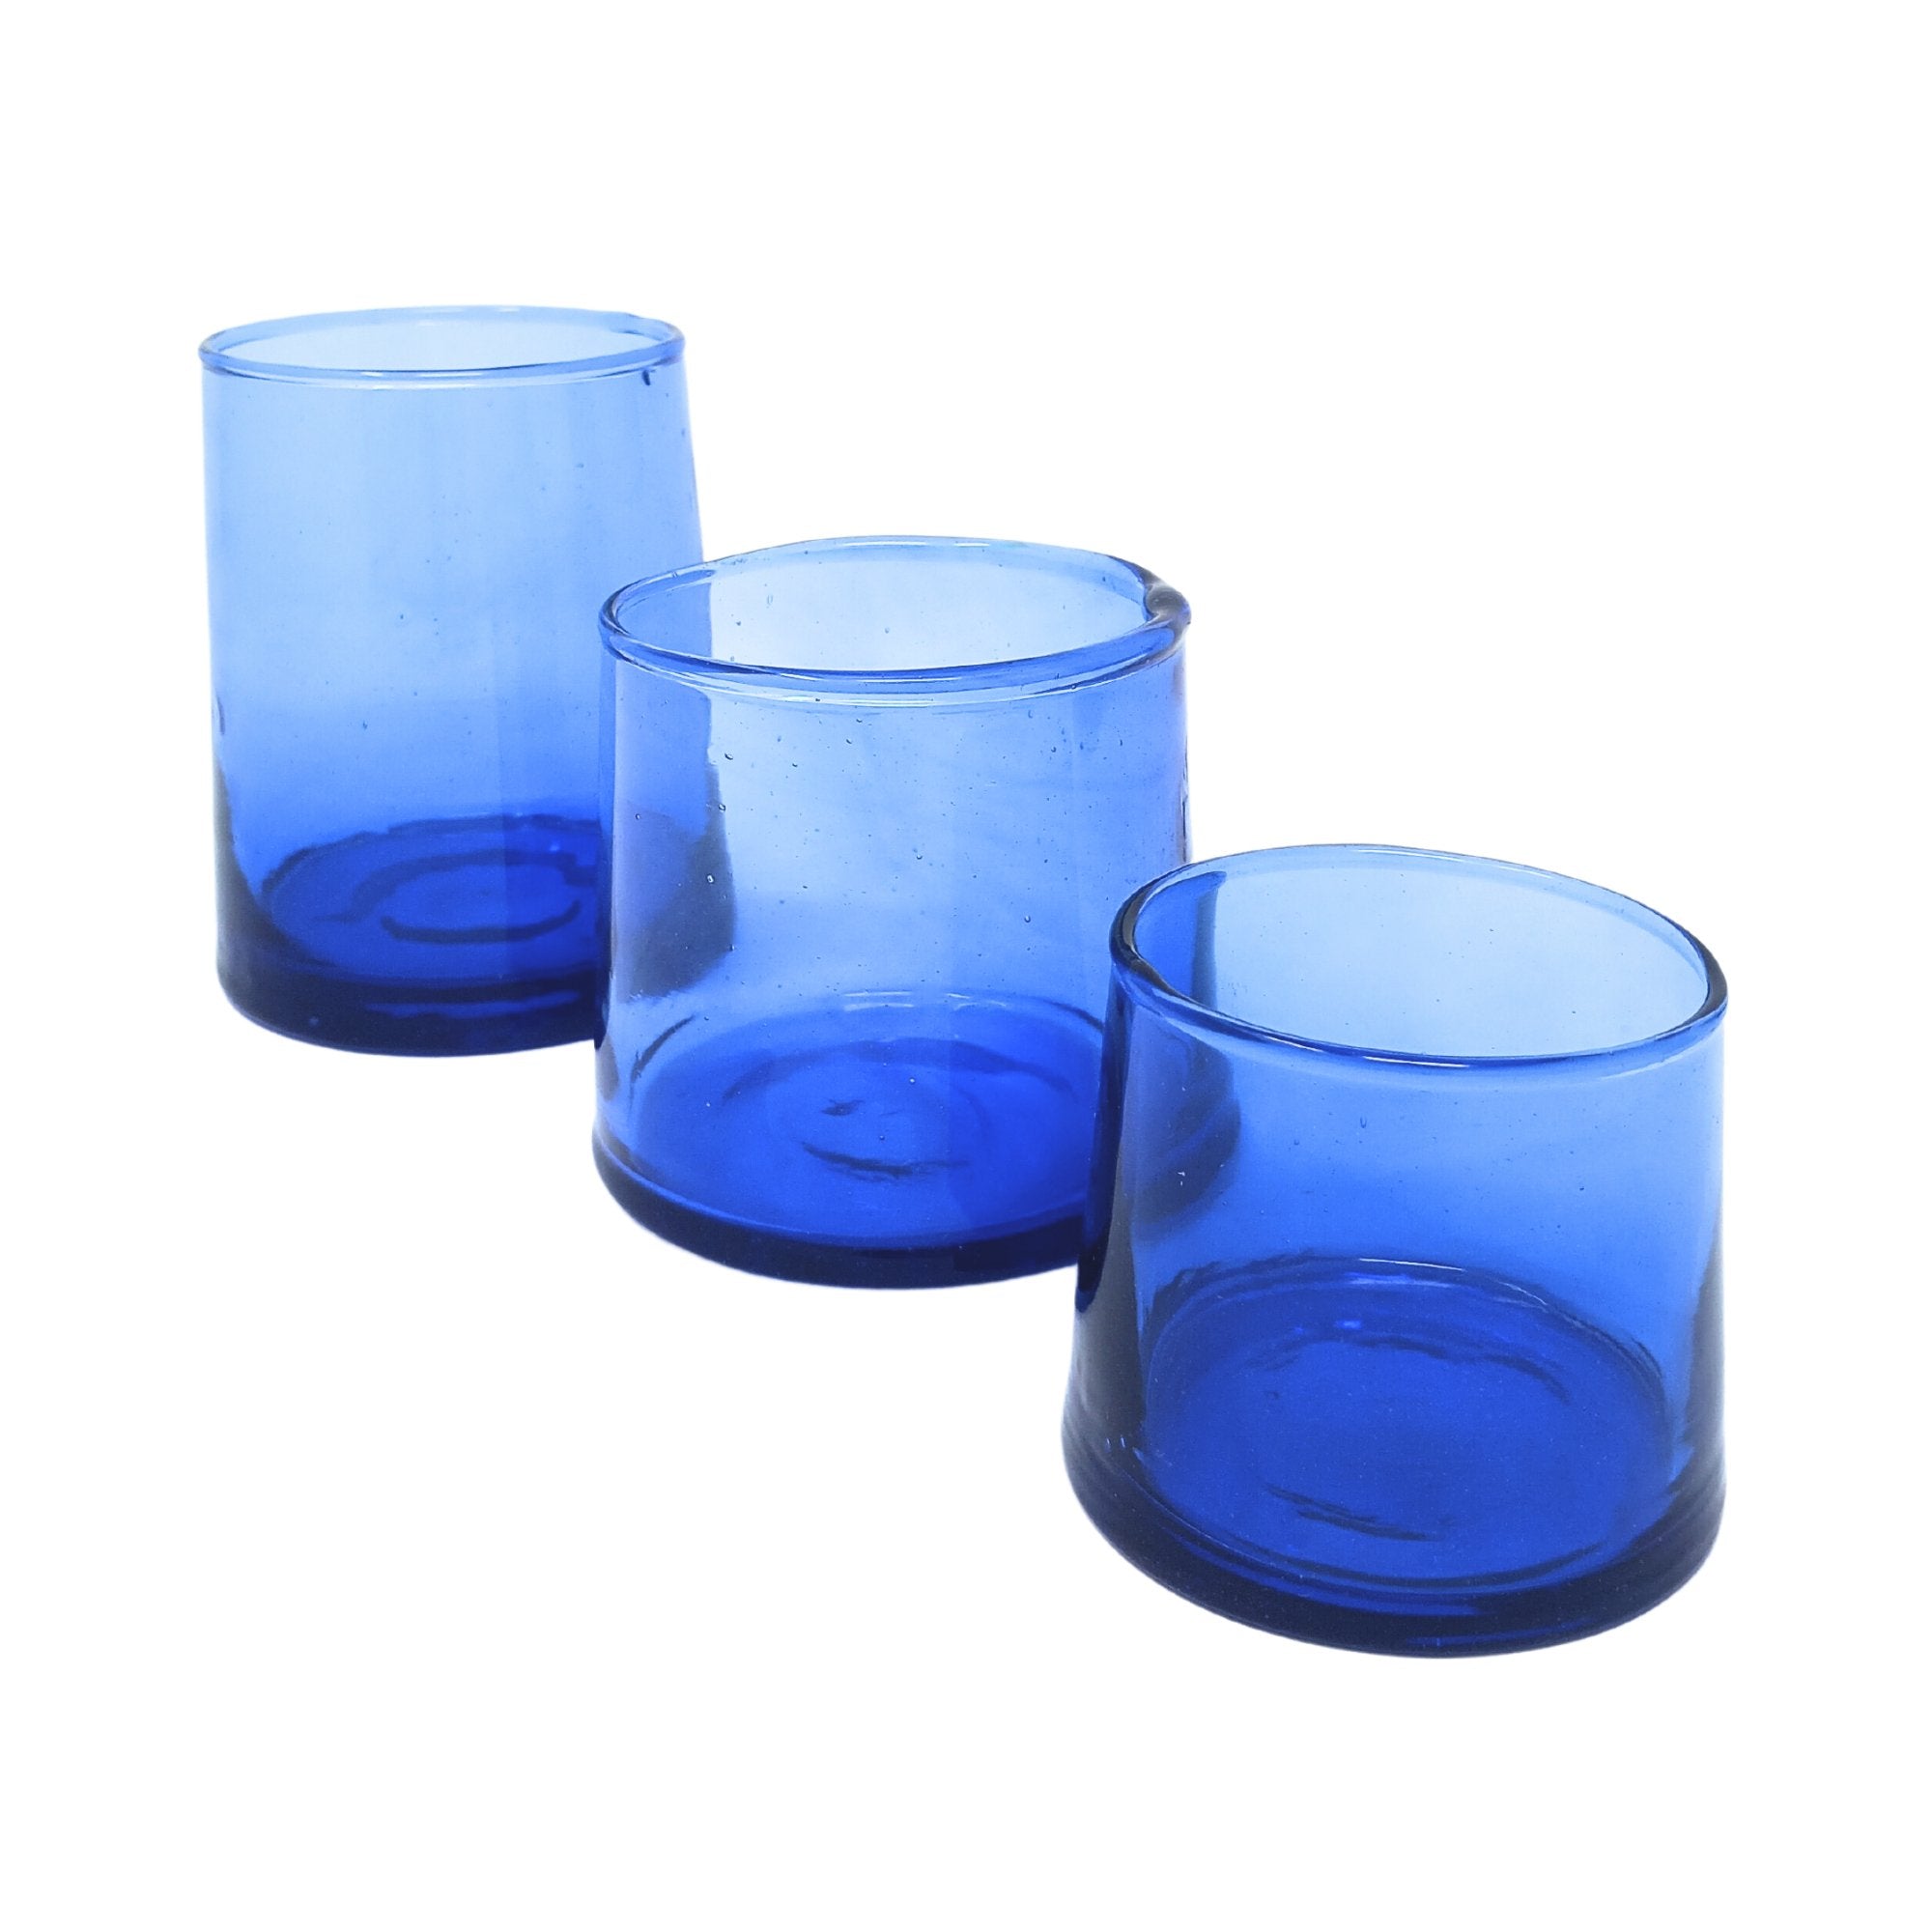 Inverted Recycled Drinking Glass Blue - Artisan Stories